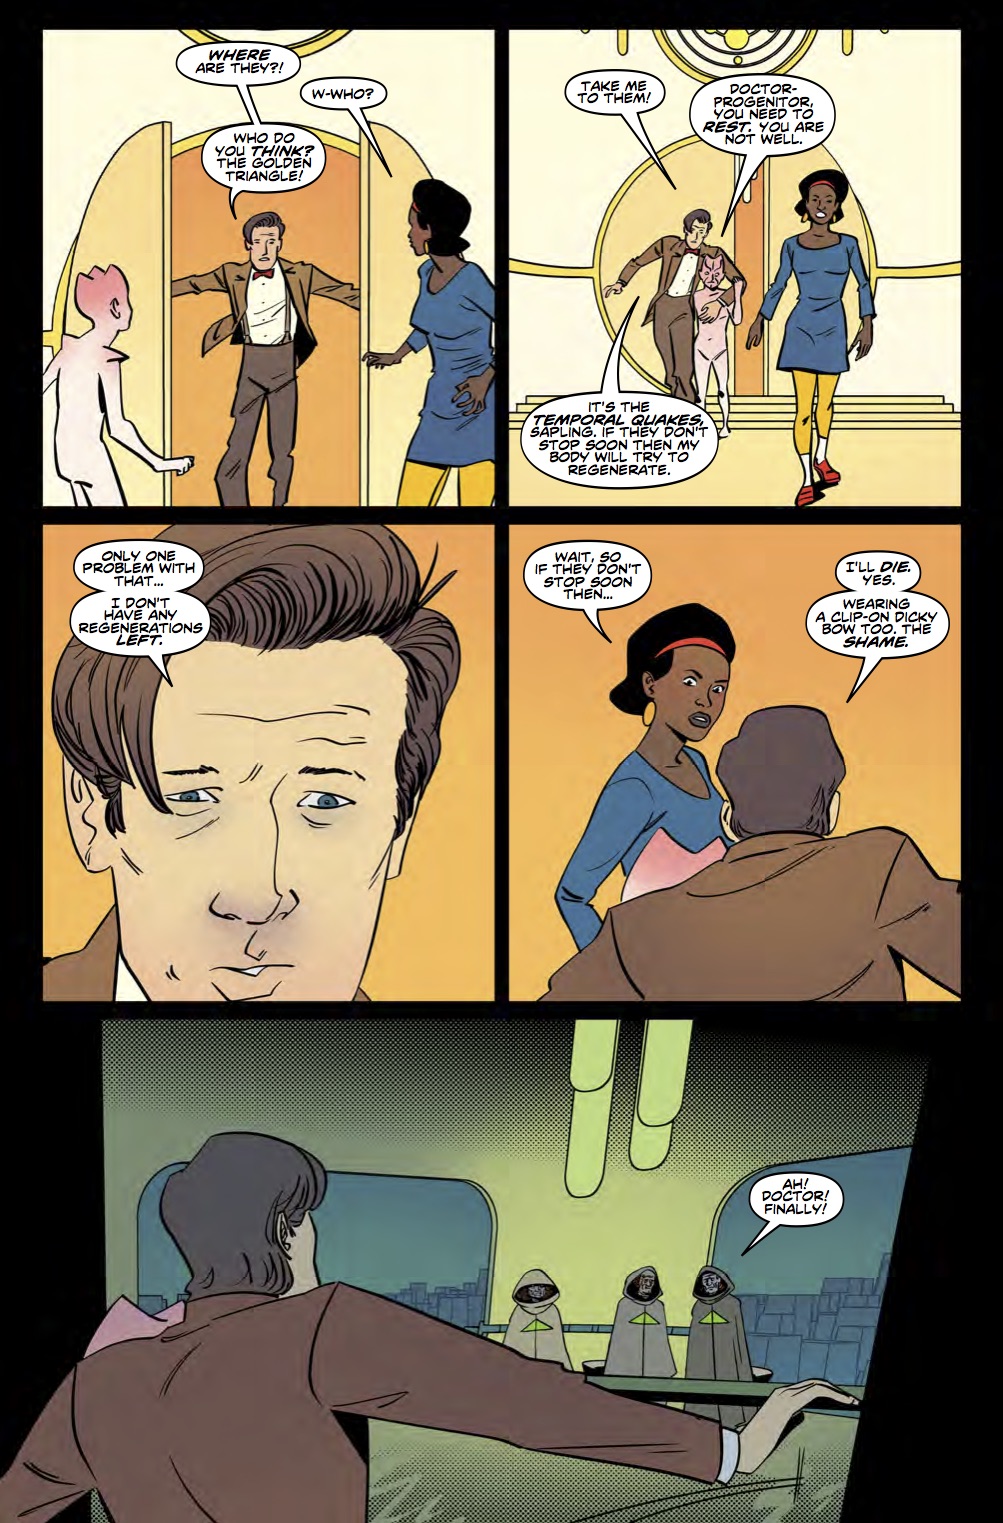 Eleventh_Doctor_3_11_Page 3